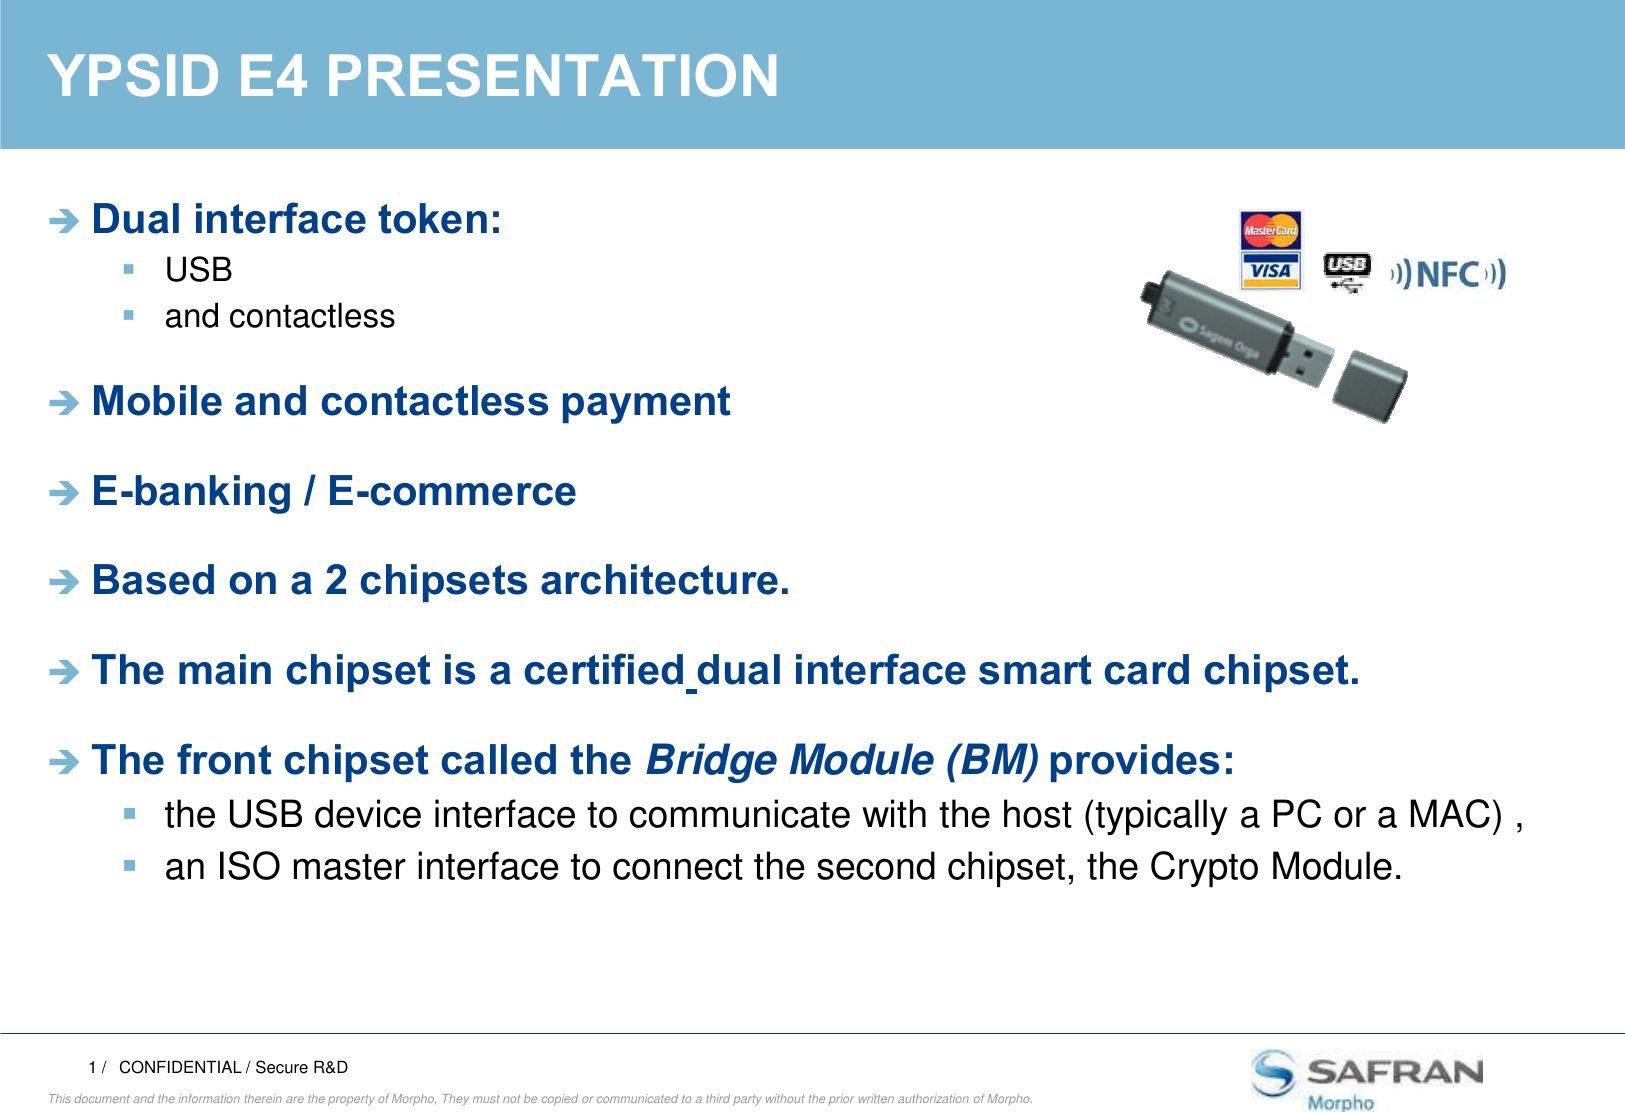 RESTRICTED MORPHOYPSID E4 PRESENTATIONDual interface token:USB and contactlessMobile and contactless paymentE-banking / E-commerceBased on a 2 chipsets architecture.1 /This document and the information therein are the property of Morpho, They must not be copied or communicated to a third party without the prior written authorization of Morpho.Based on a 2 chipsets architecture.The main chipset is a certified dual interface smart card chipset. The front chipset called the Bridge Module (BM) provides:the USB device interface to communicate with the host (typically a PC or a MAC) ,an ISO master interface to connect the second chipset, the Crypto Module. CONFIDENTIAL / Secure R&amp;D